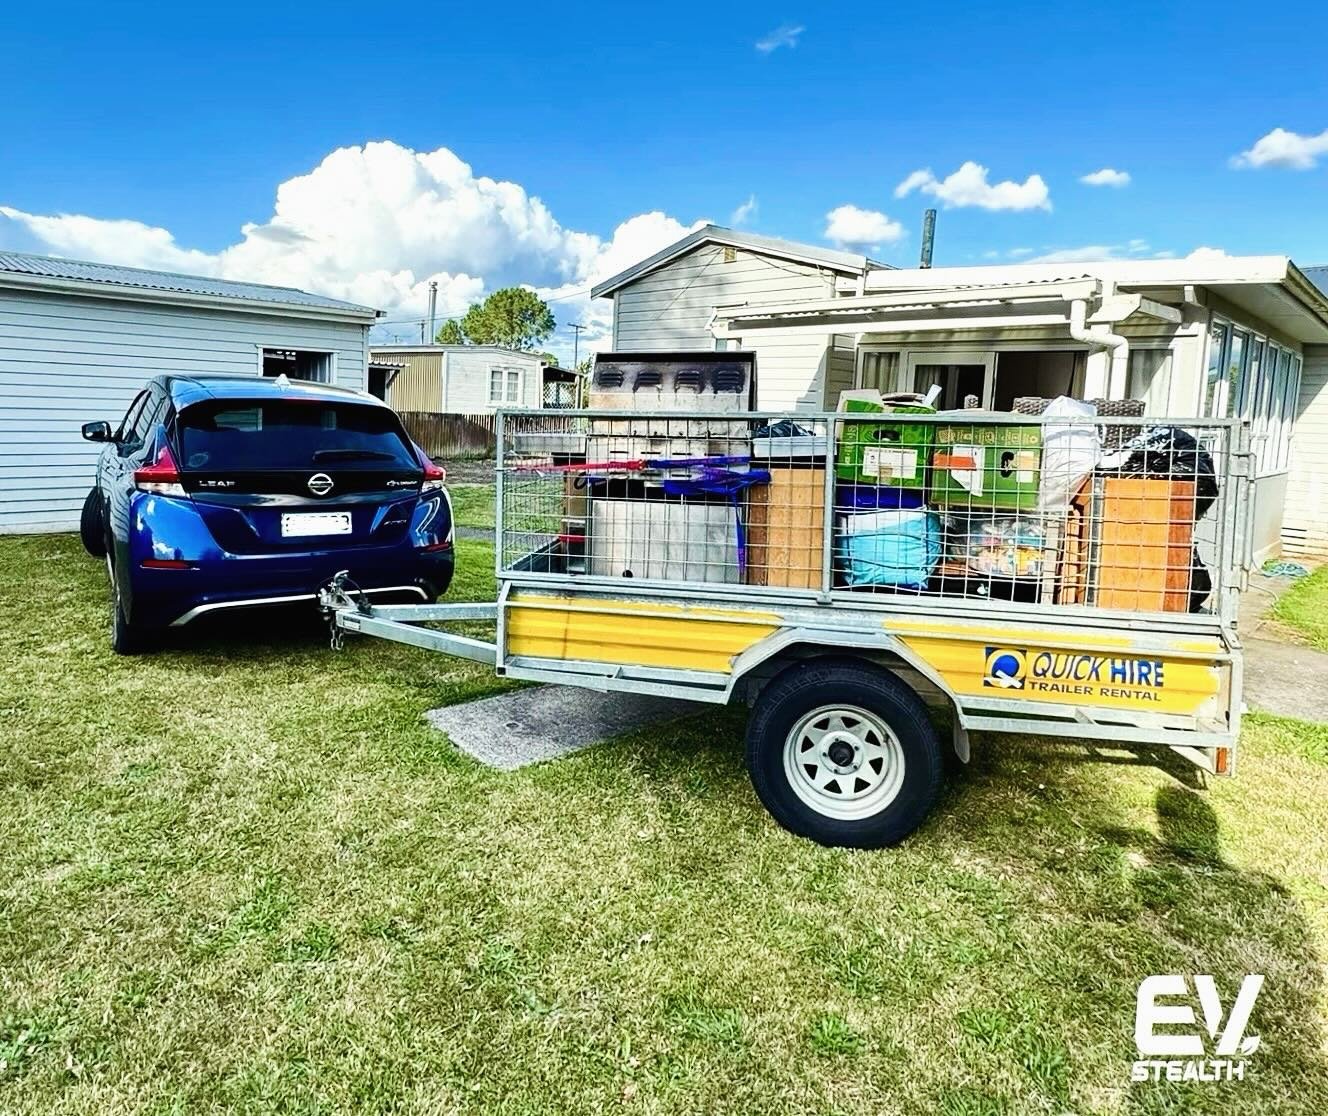 EV Stealth&rsquo;s #nissanleaf towbar - the only Australian solution to expand your leaf&rsquo;s #ev experience. 
.
.
.
.
.
.
#evstealth #evstealthsolutions #evtowing #evtowbars #sustainabletransport #emobility #electriccarsaustralia #electricvehicle